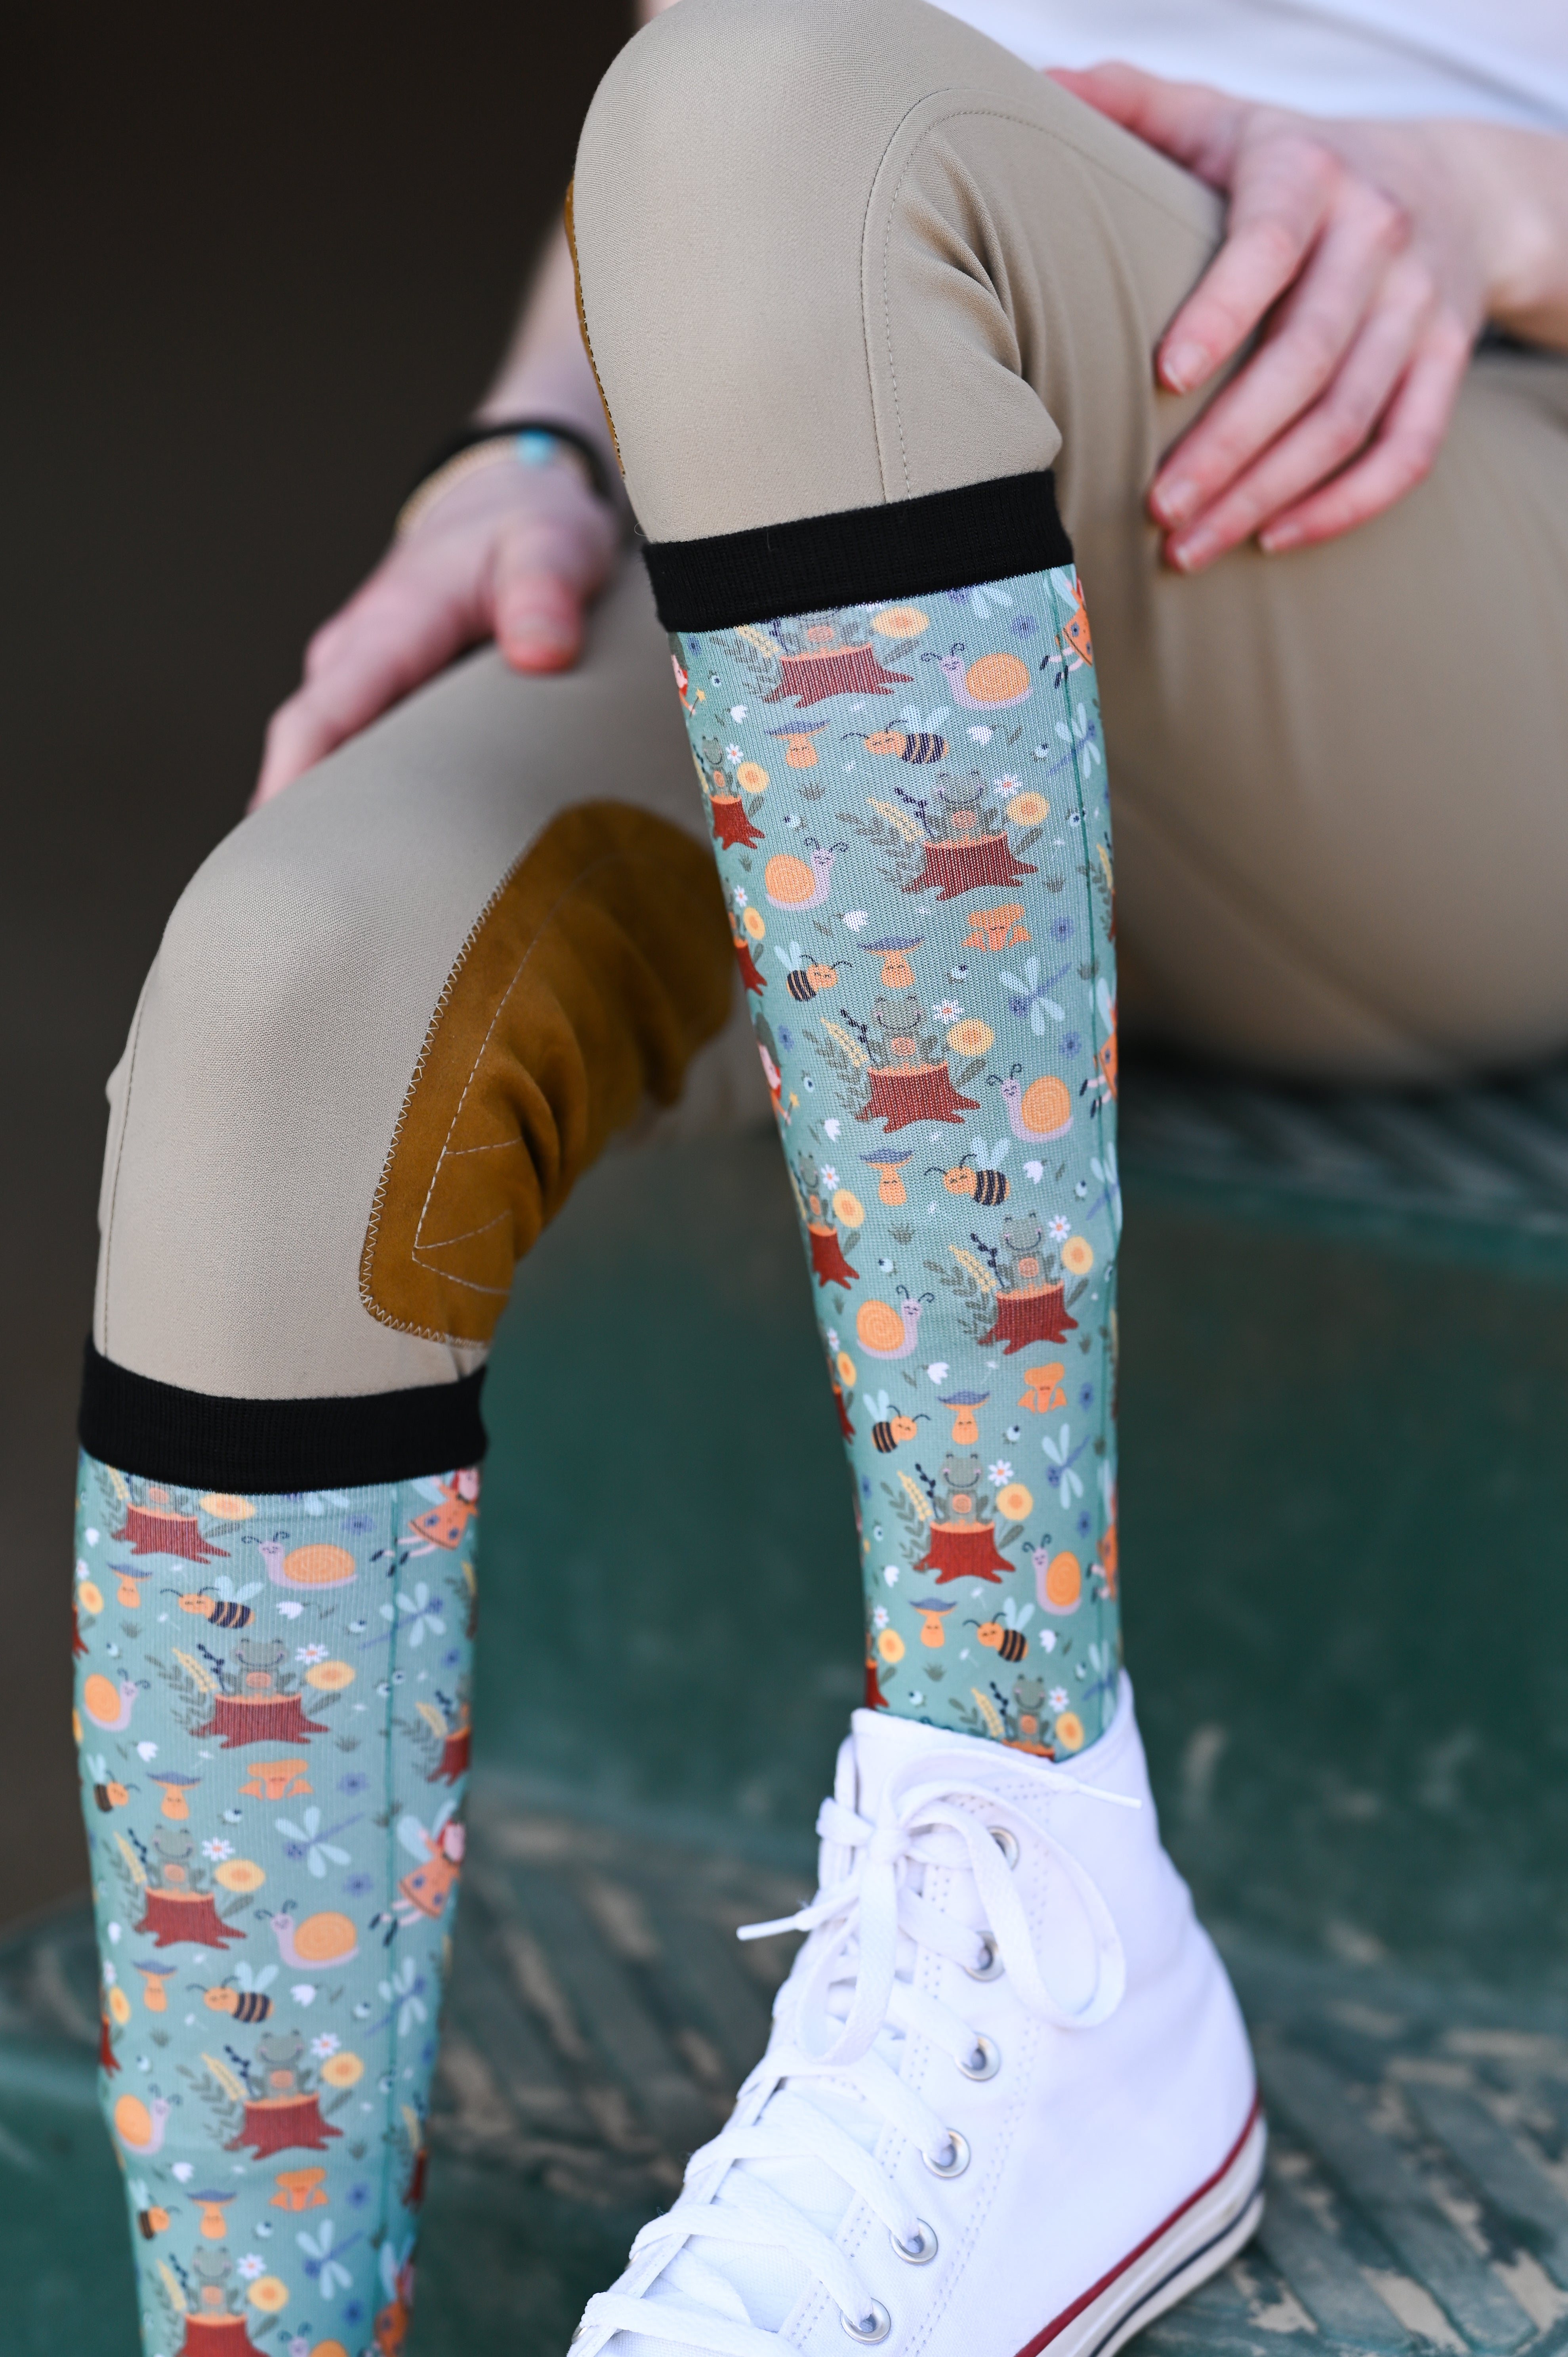 dreamers & schemers Pair & A Spare Forest Faries Youth Pair & a Spare equestrian boot socks boot socks thin socks riding socks pattern socks tall socks funny socks knee high socks horse socks horse show socks